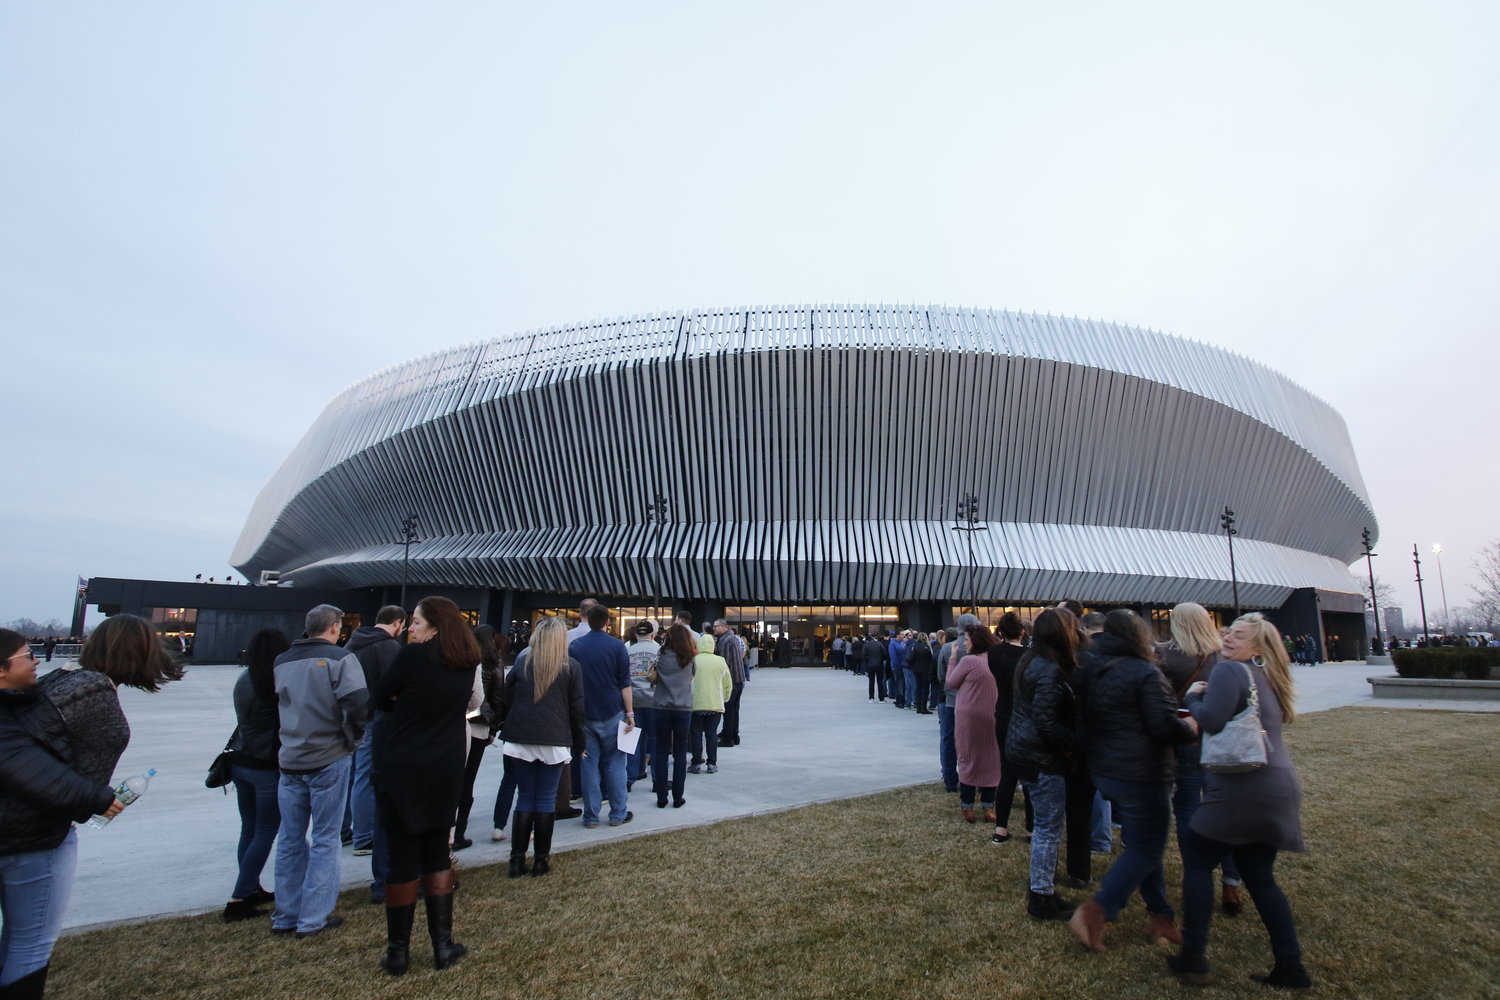 The Las Vegas Sands resort company has targeted the Nassau Veterans Memorial Coliseum property for an upscale casino.